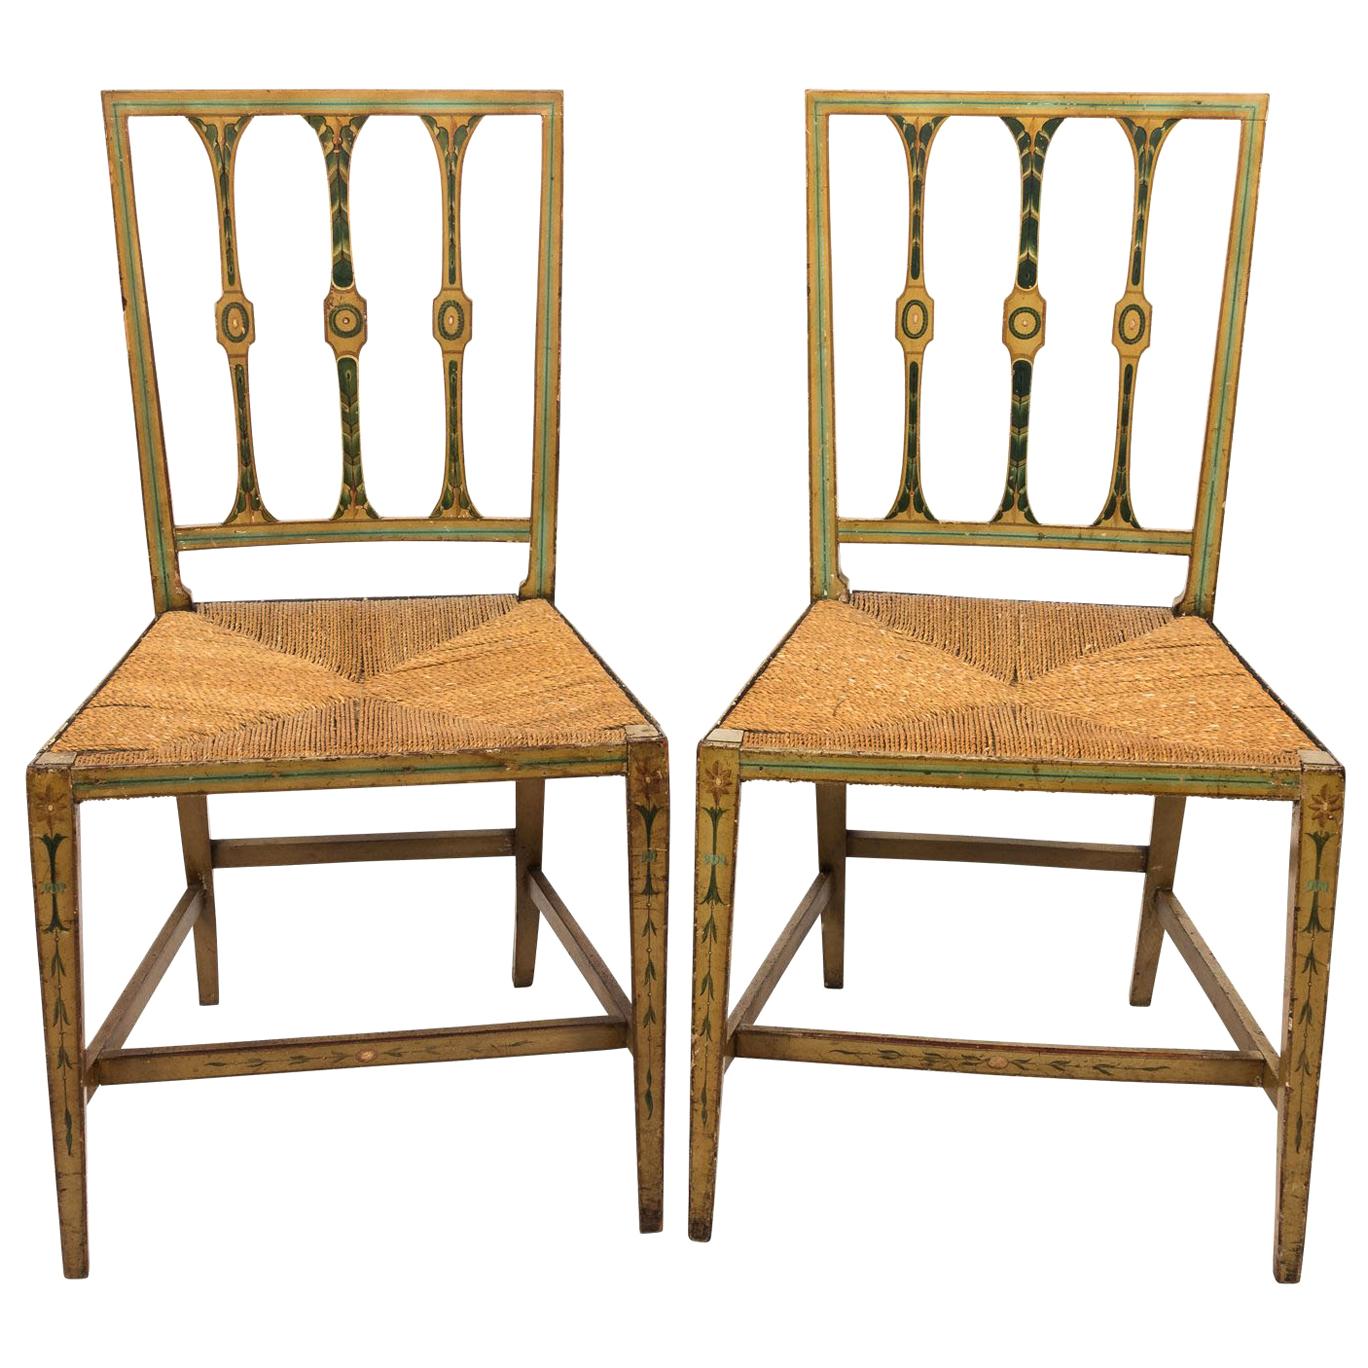 Pair of Green Painted English Regency Style Side Chairs